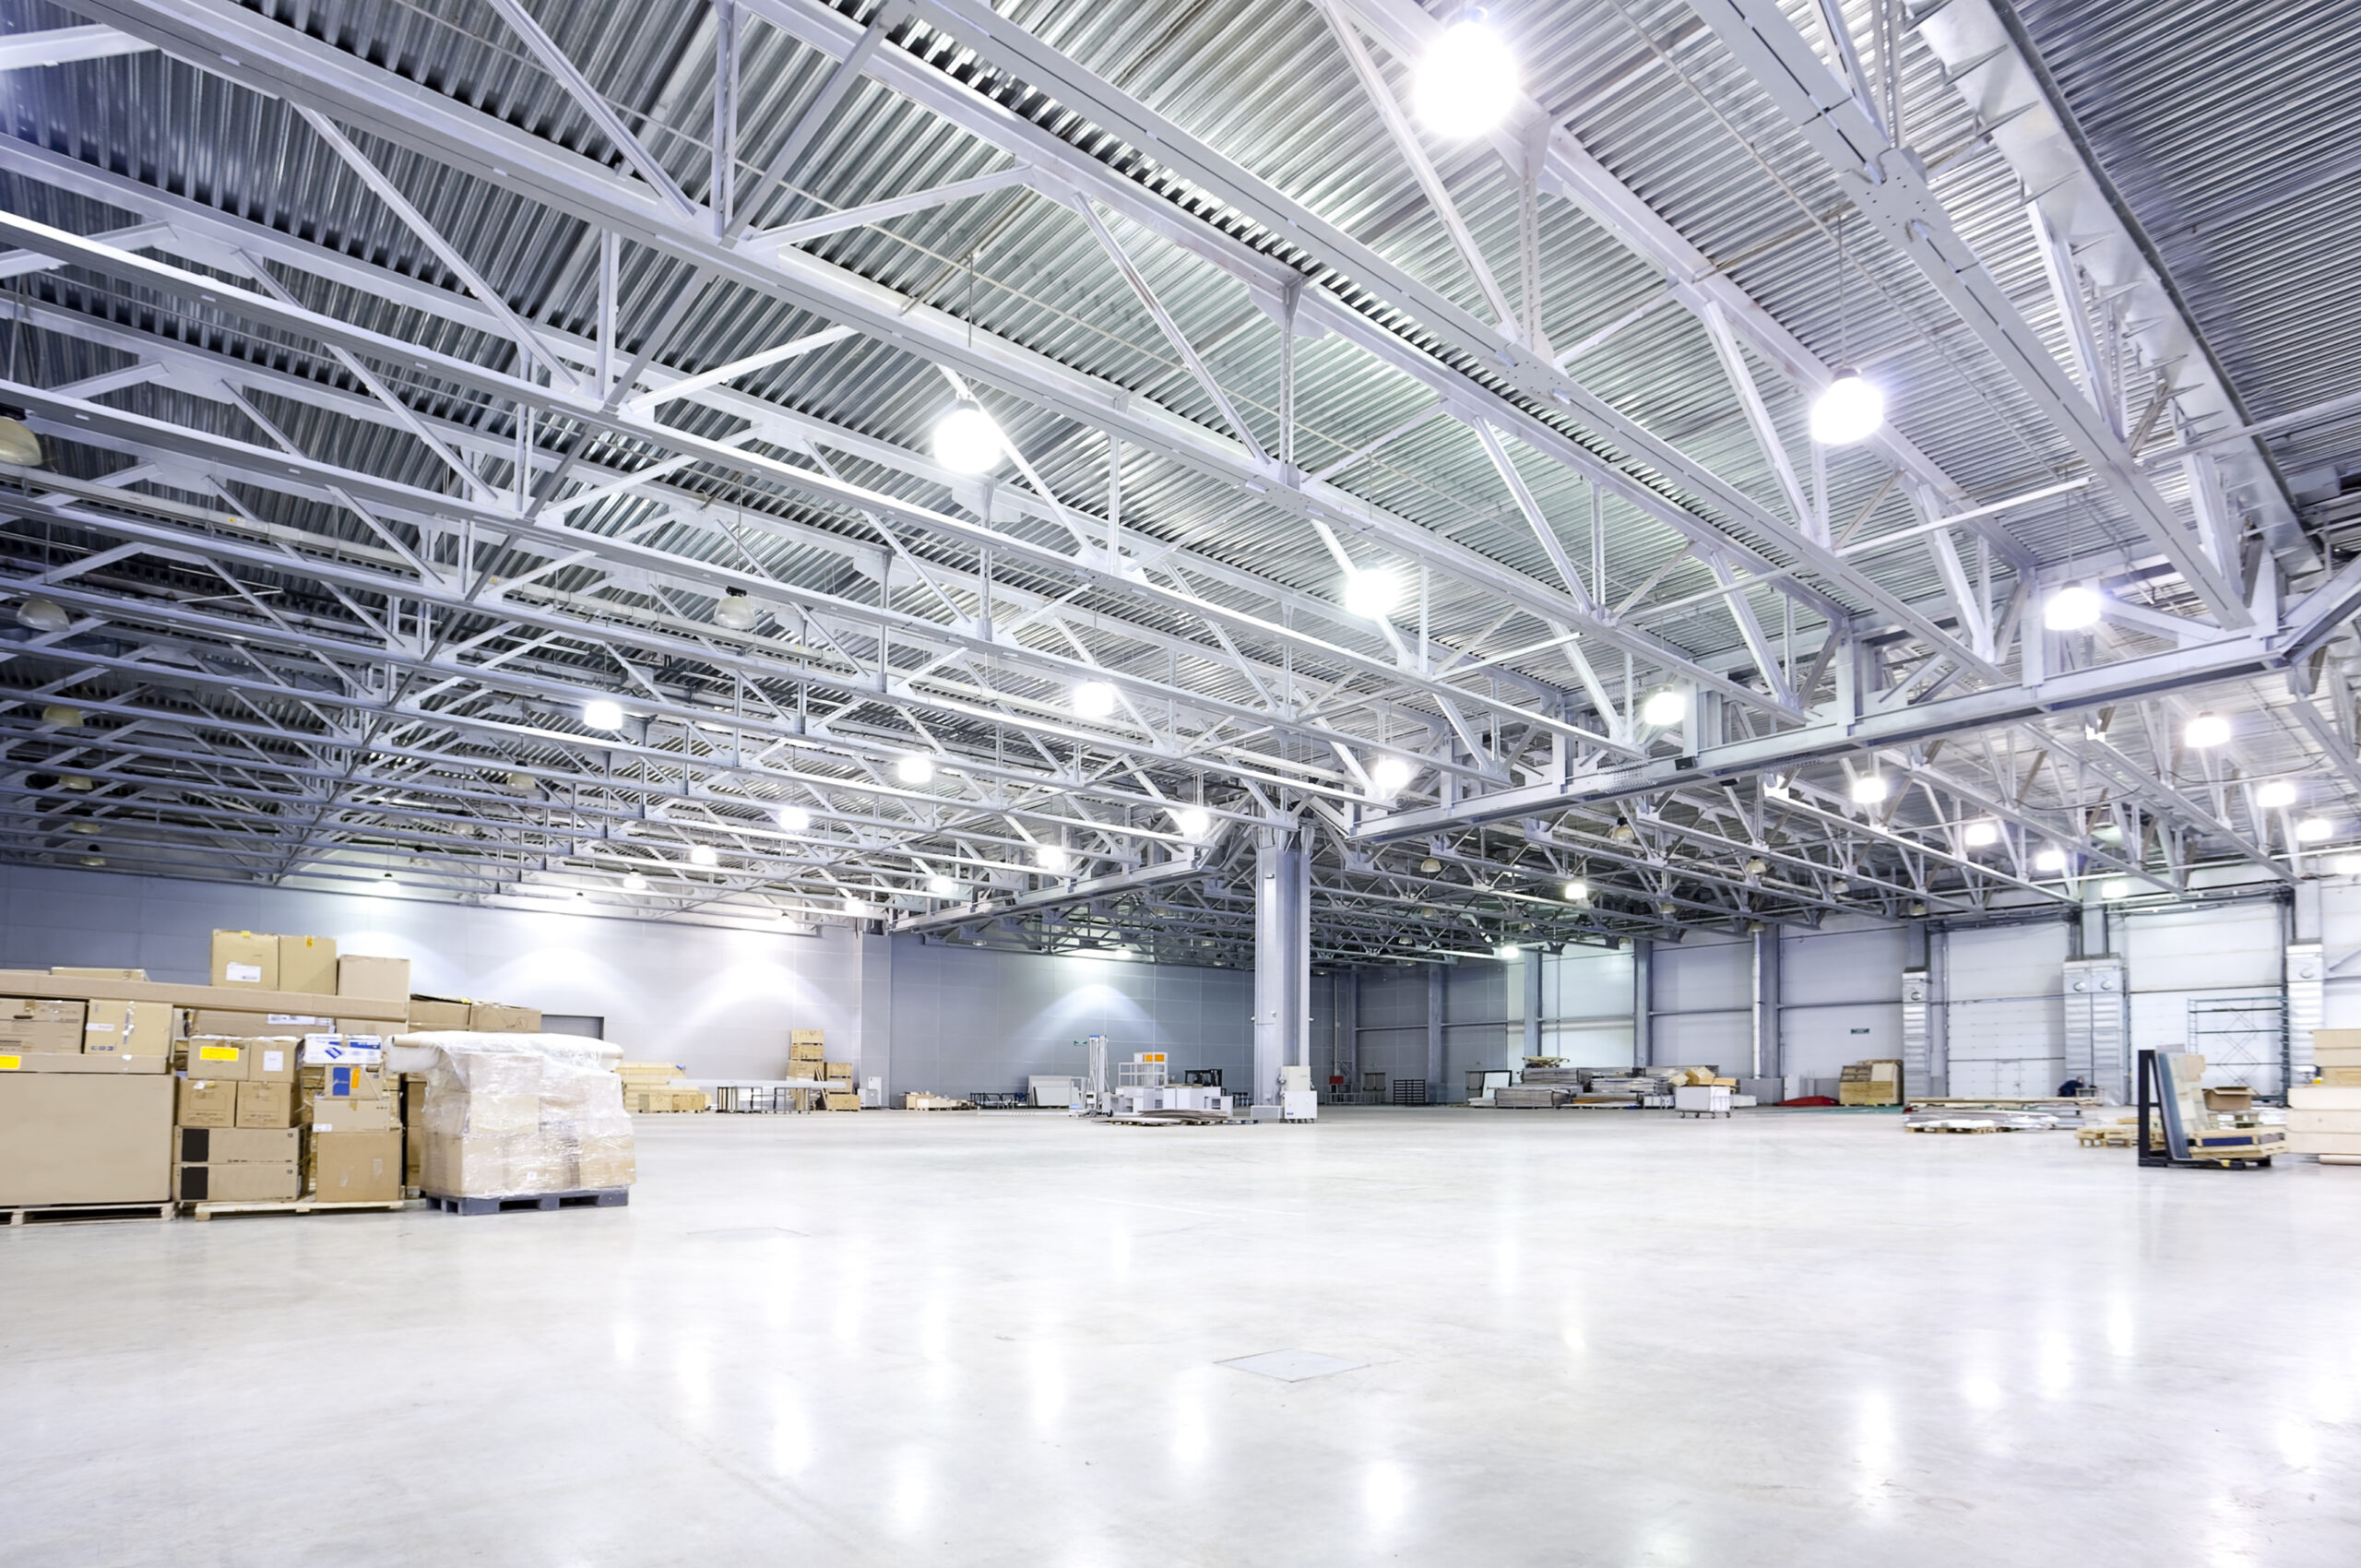 Warehouse Lighting 101 – Why You Should Upgrade To LED High Bay Lights